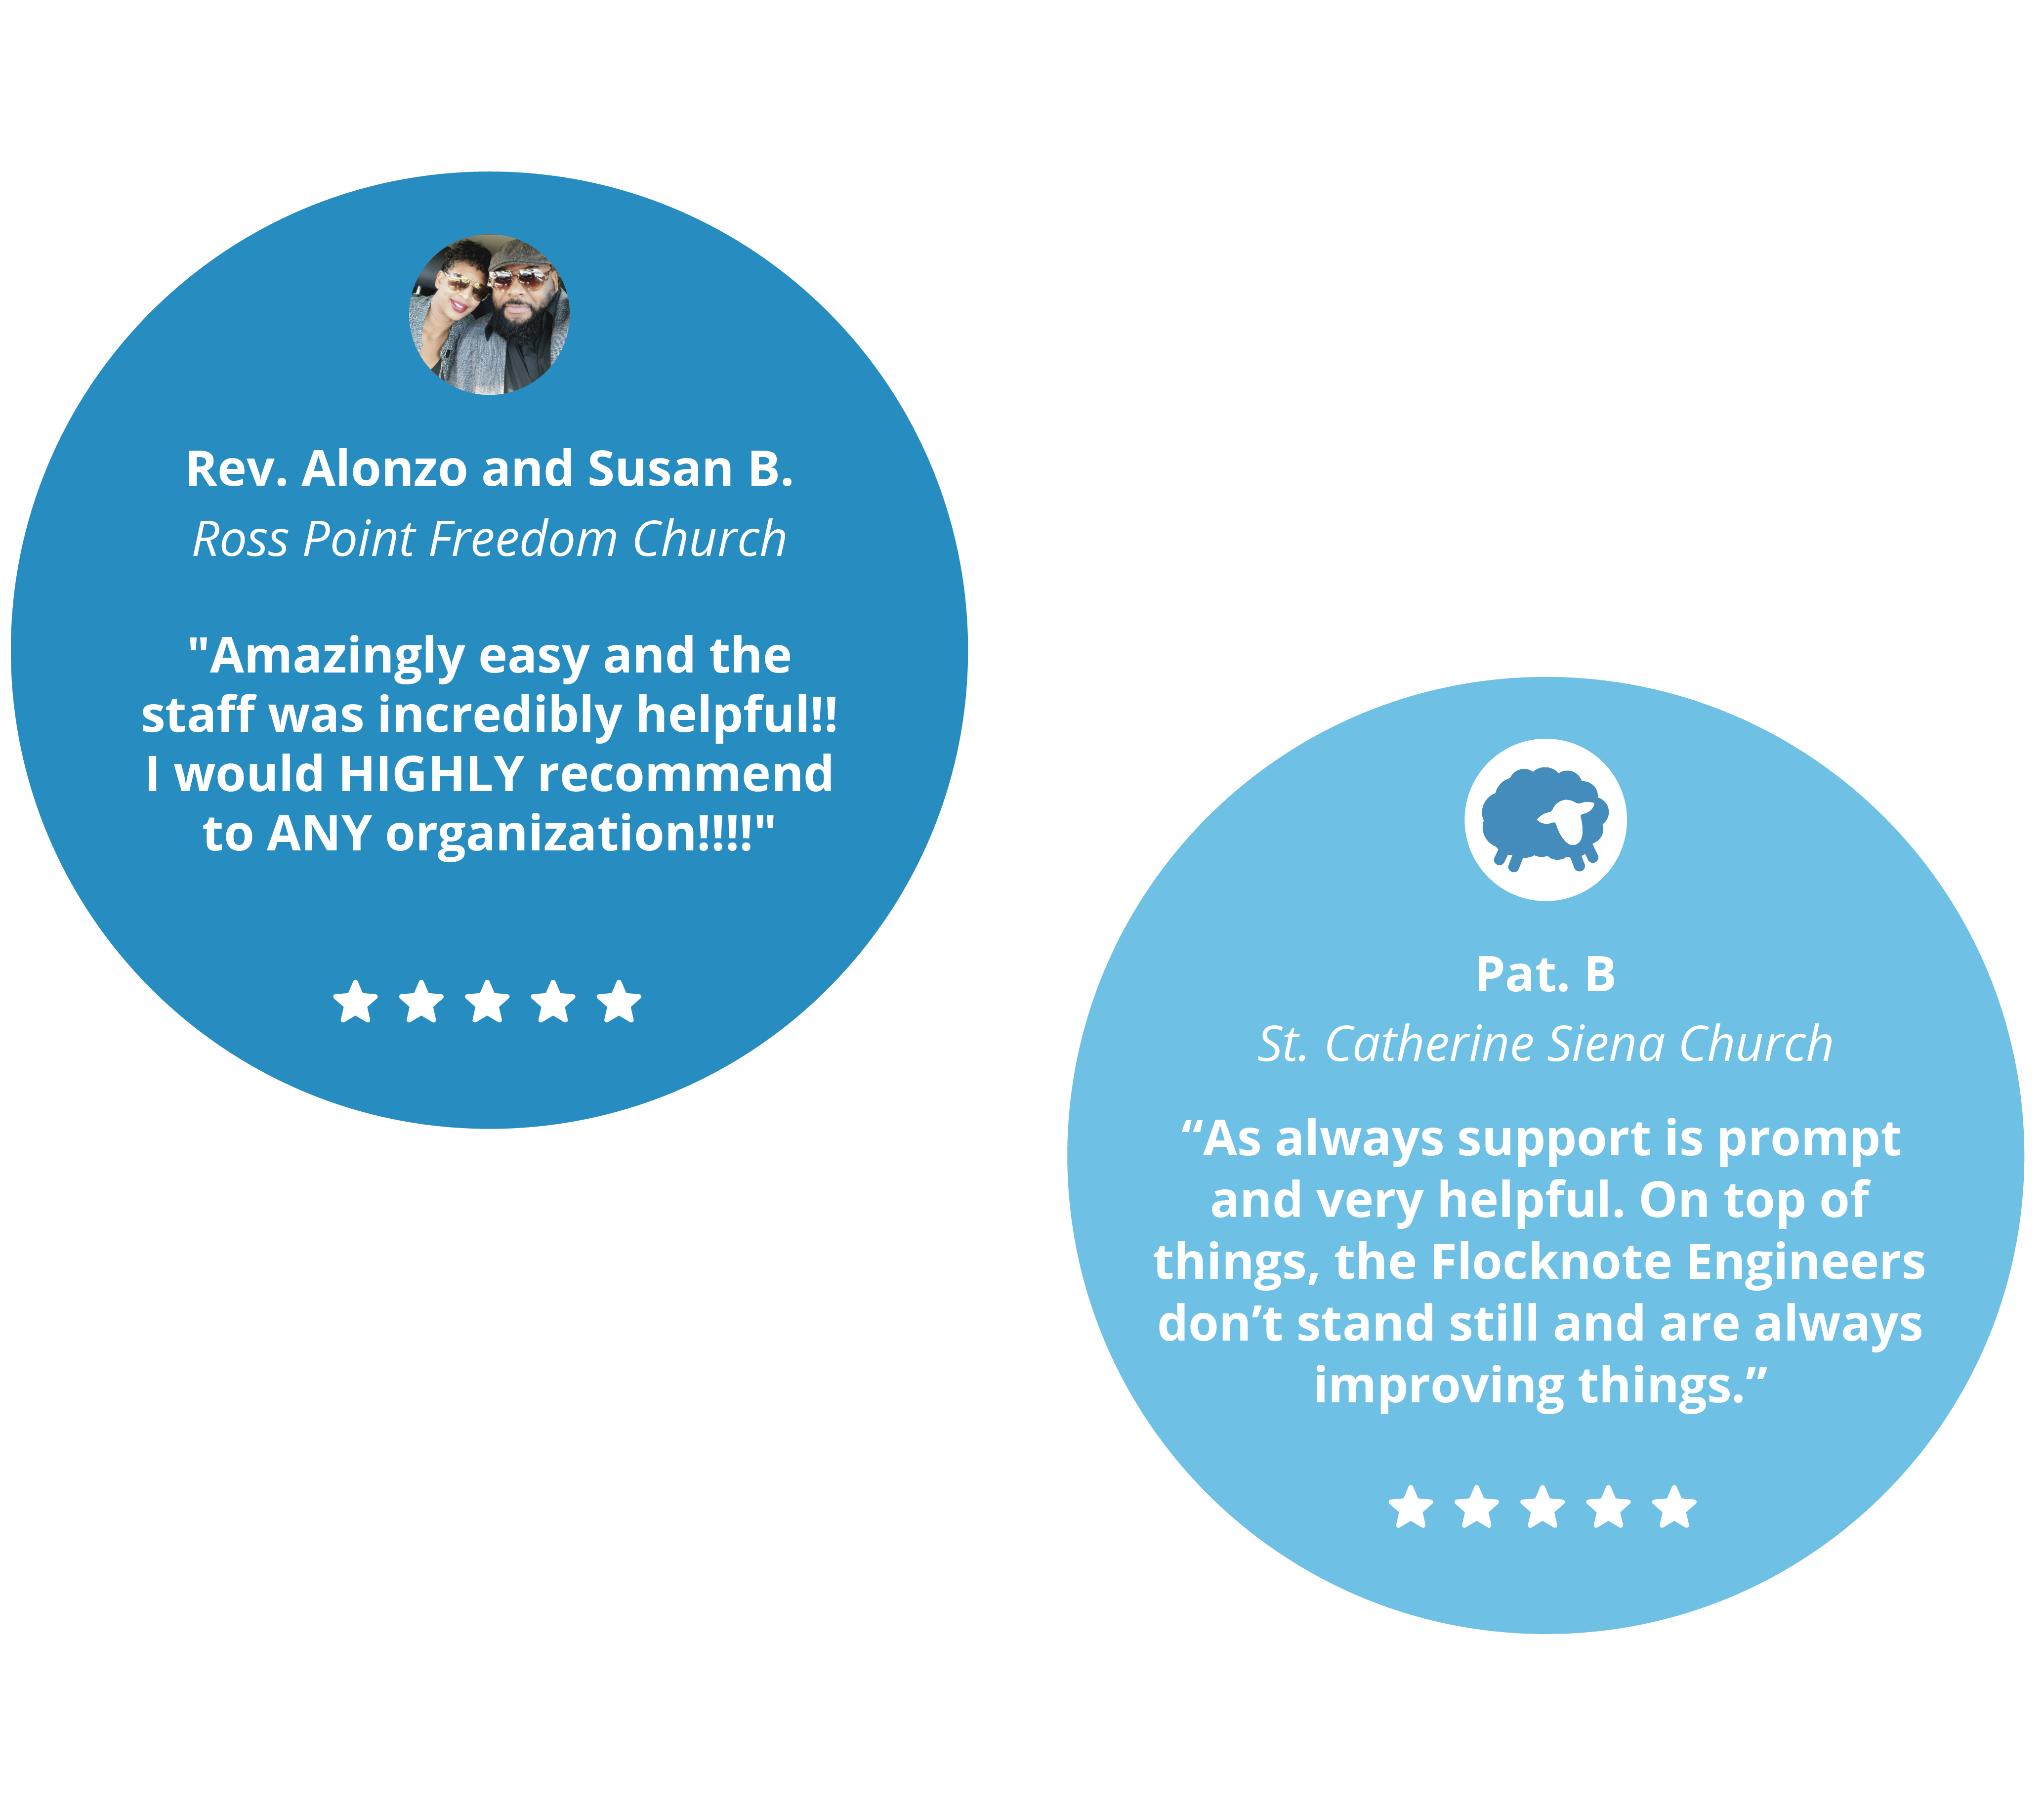 5 star review from Pat B. from St. Catherine Siena Church,"As always support is prompt and very helpful. On top of things, Flocknote Engineers don’t stand still and are always improving things.”